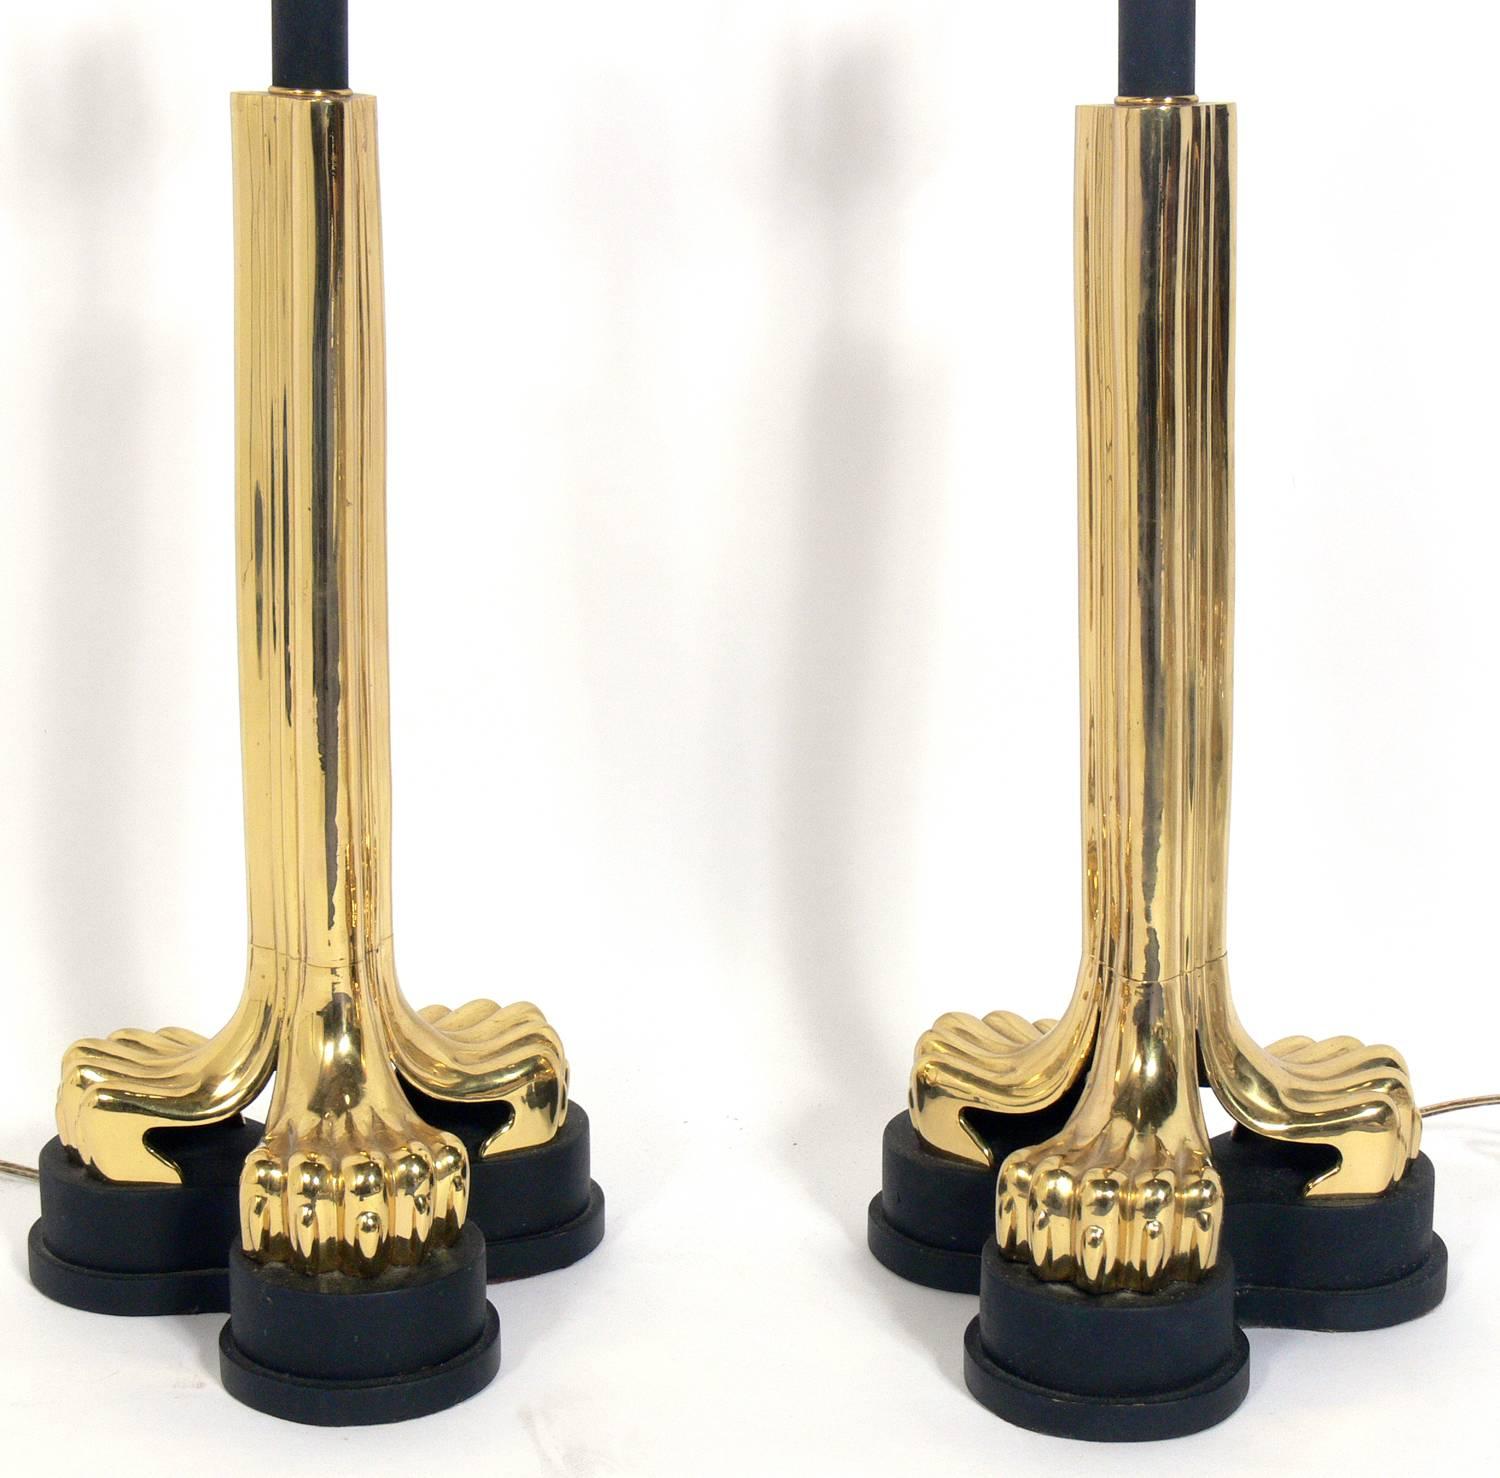 Pair of Zoomorphic brass lamps, American, circa 1970s. They have sculptural claw feet in black and brass. Rewired and ready to use. They price noted includes the shades.